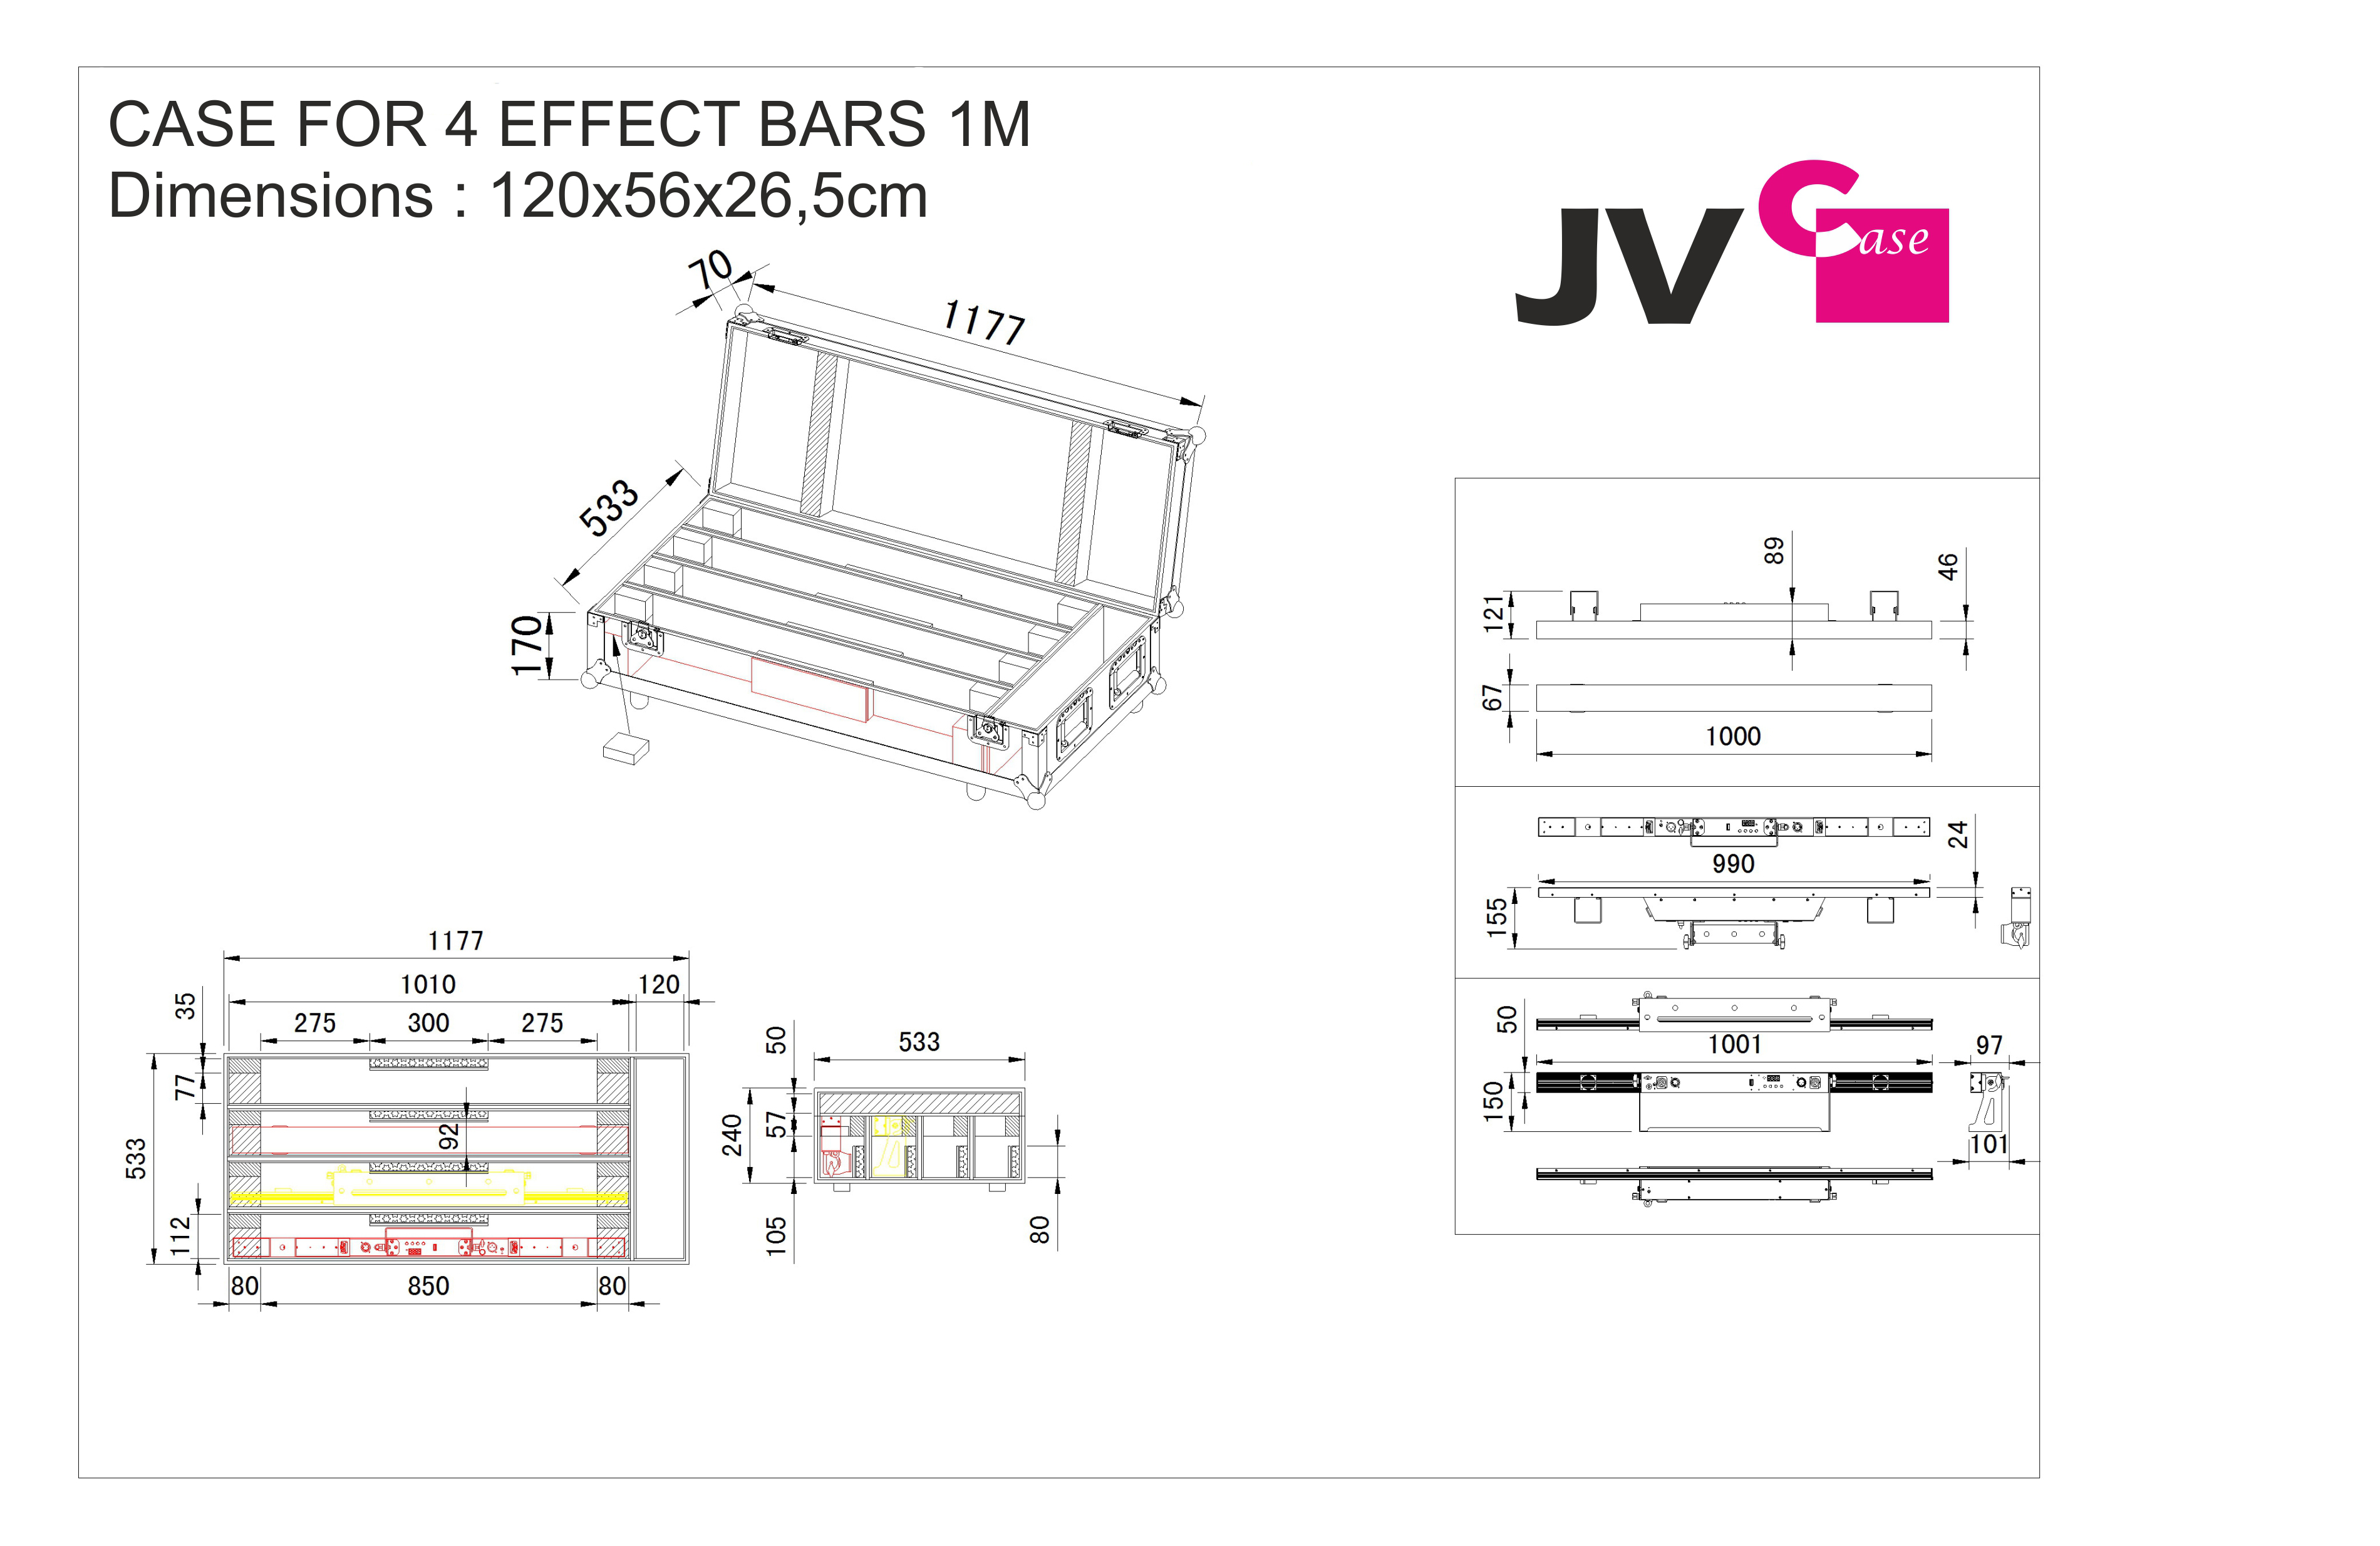 CASE FOR 4 EFFECT BARS 1M - Dimensions